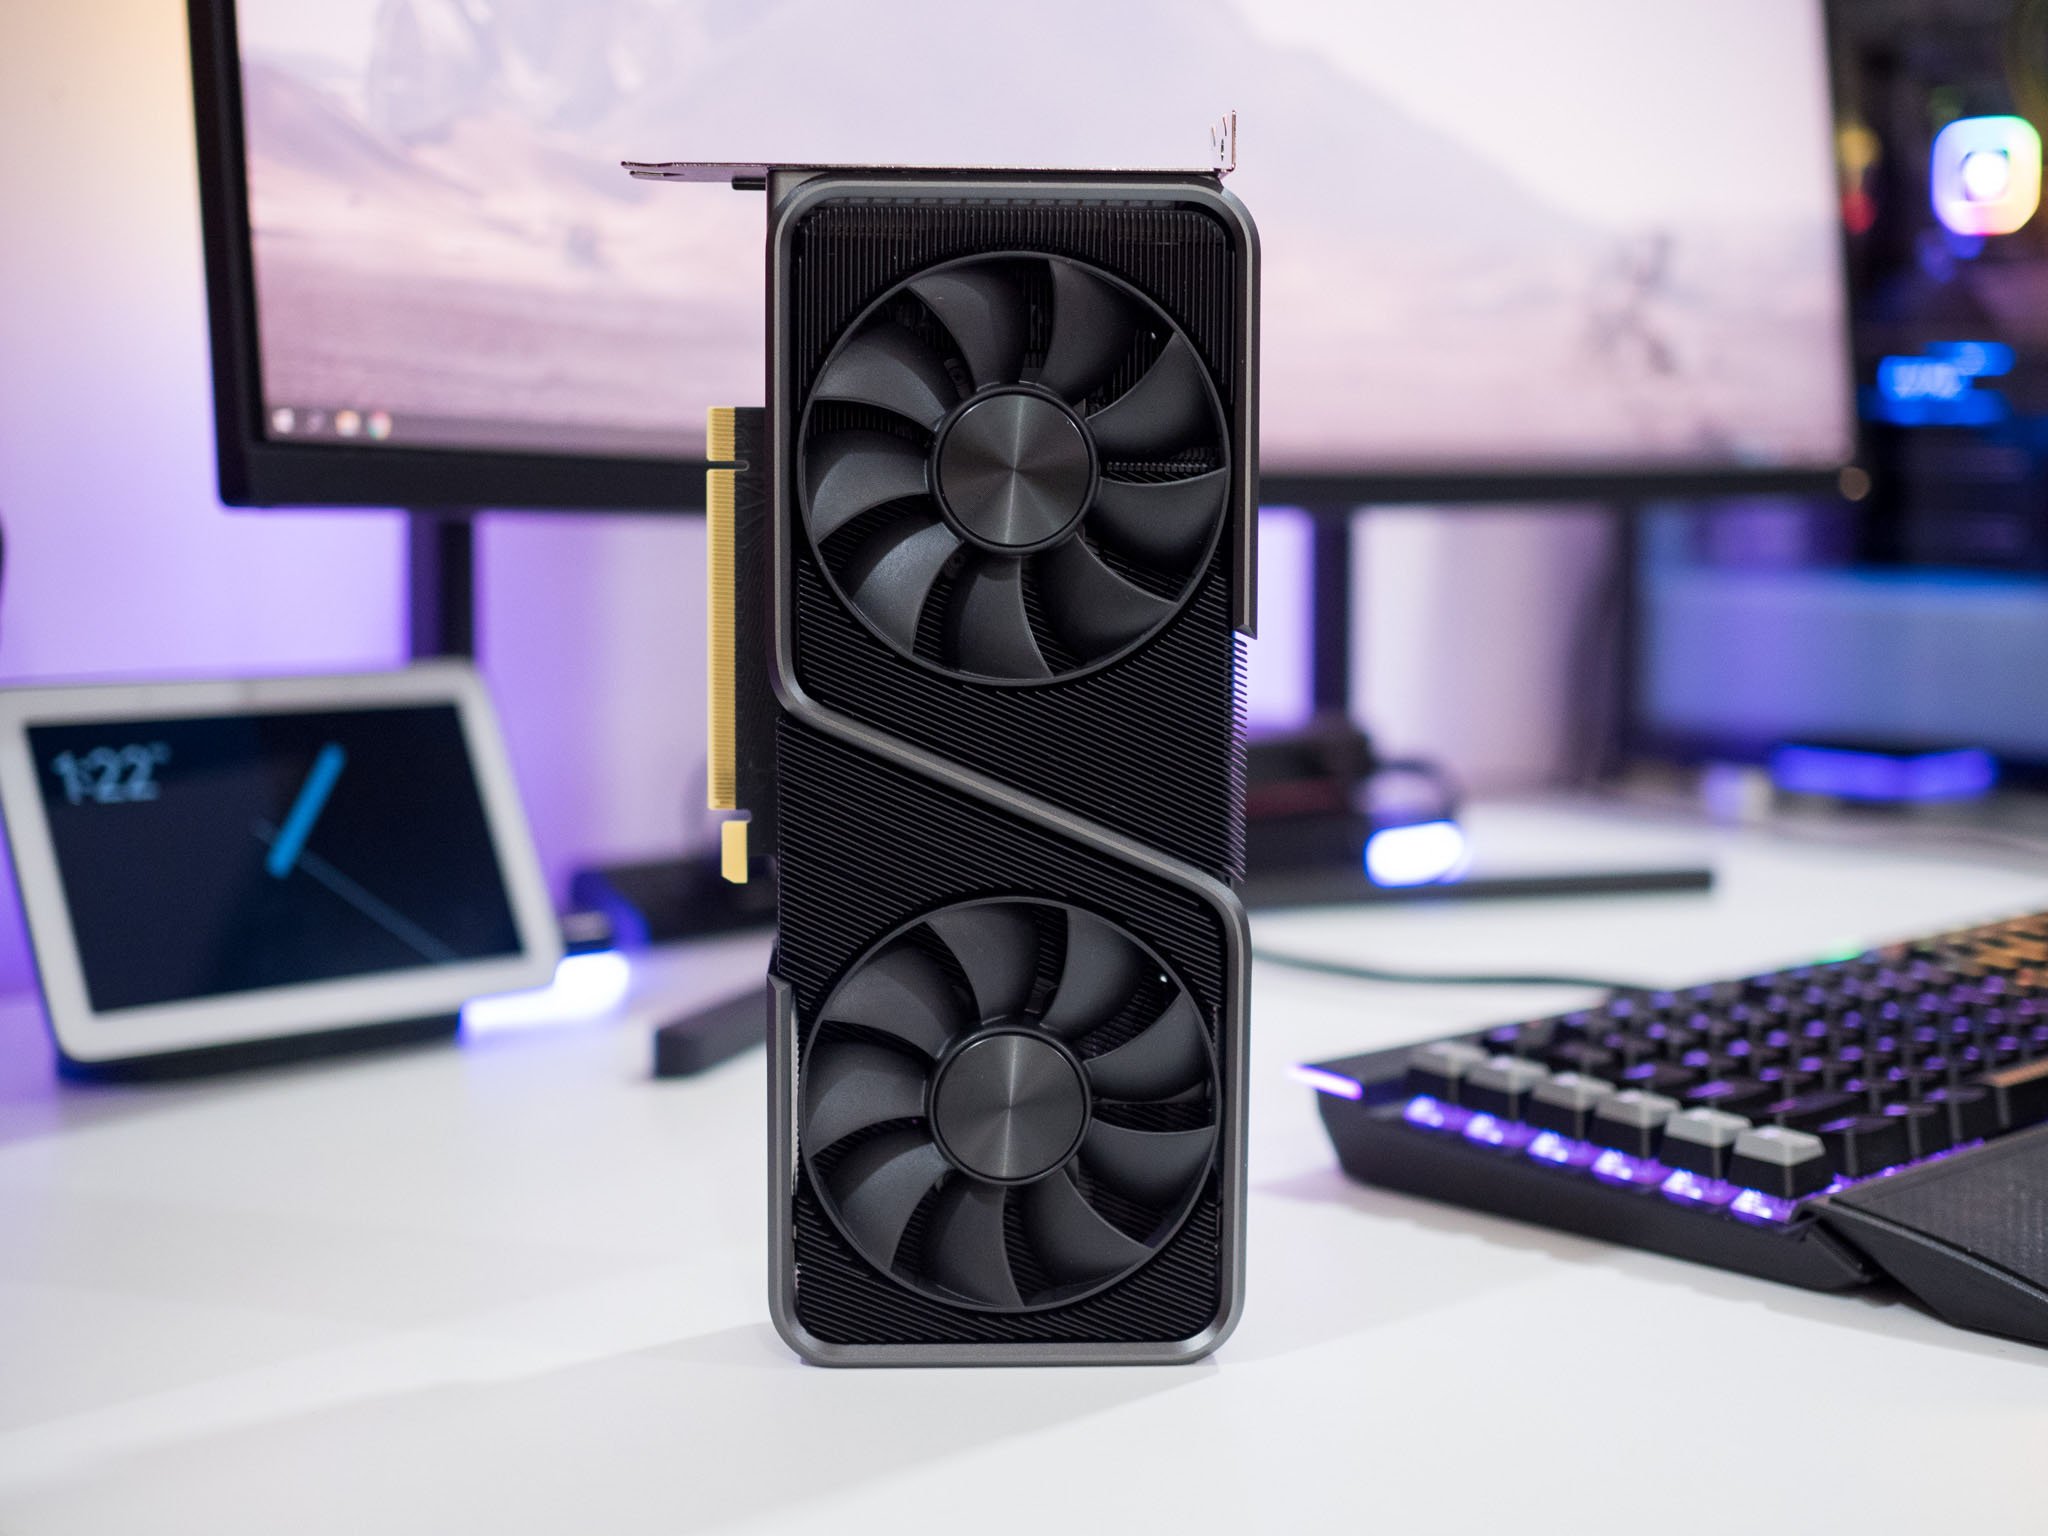 ASUS TUF Gaming RTX 3070 Ti review: A compelling GPU upgrade for 